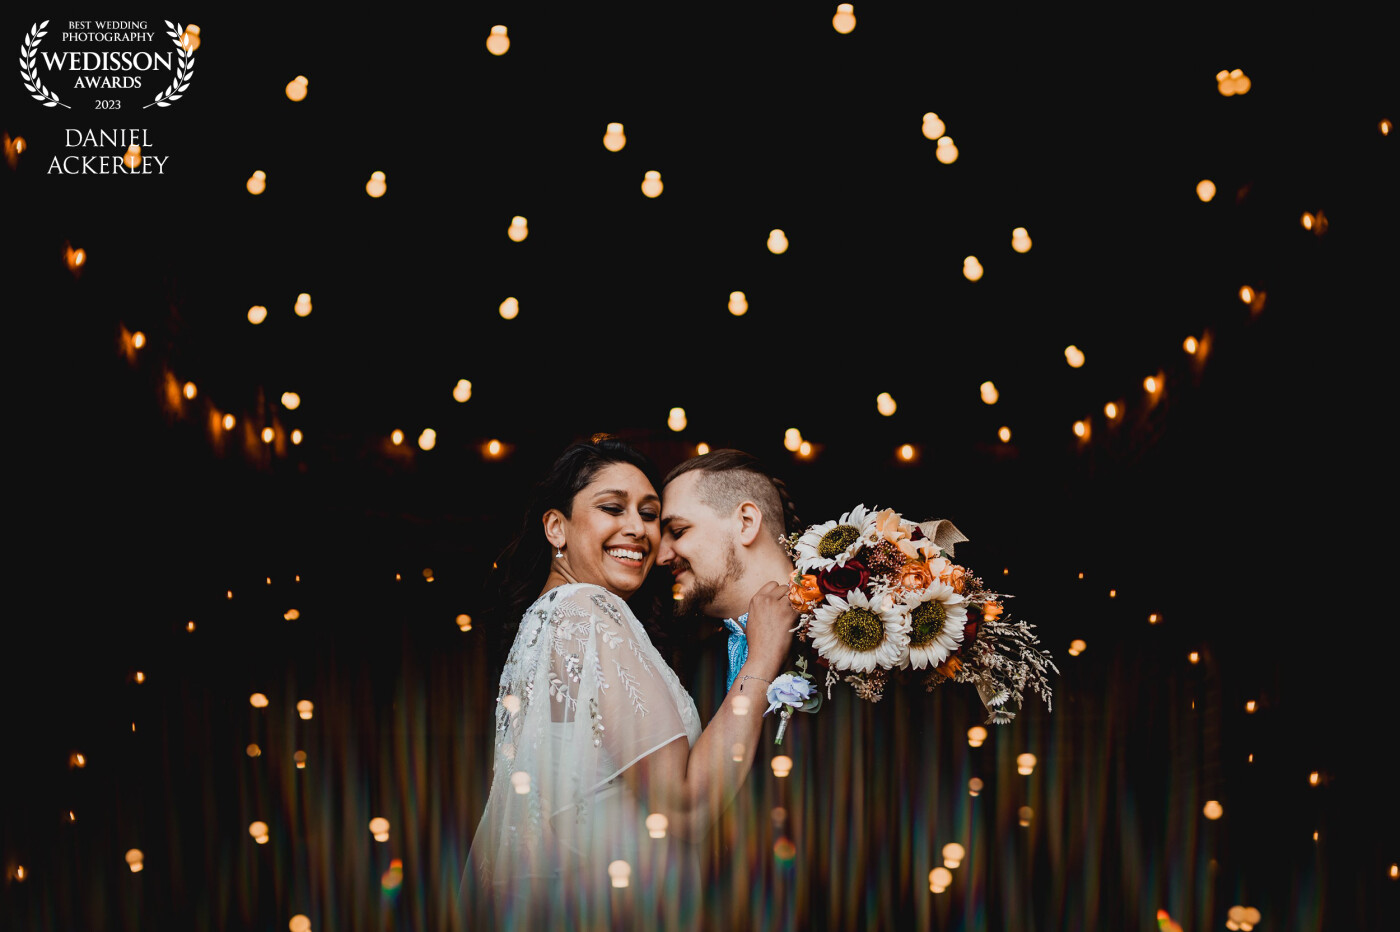 Sabrina is an old friend of mine and a fellow photographer, so I was quite nervous about capturing her wedding to Phil up in Manchester, the venue had a wonderful barn full of ceiling lights that I thought would make a great reflected portrait so I used my phone to bounce the reflection back into the photo!